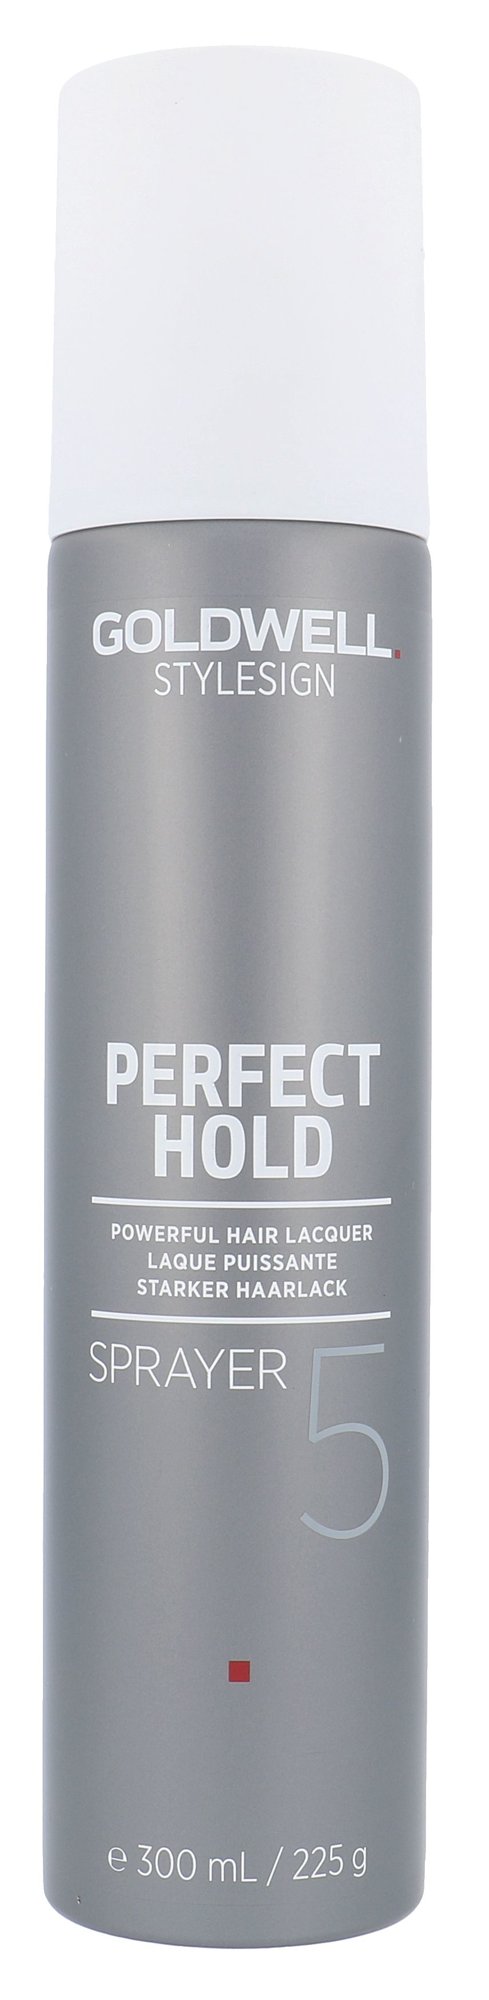 Goldwell Style Sign Perfect Hold Sprayer